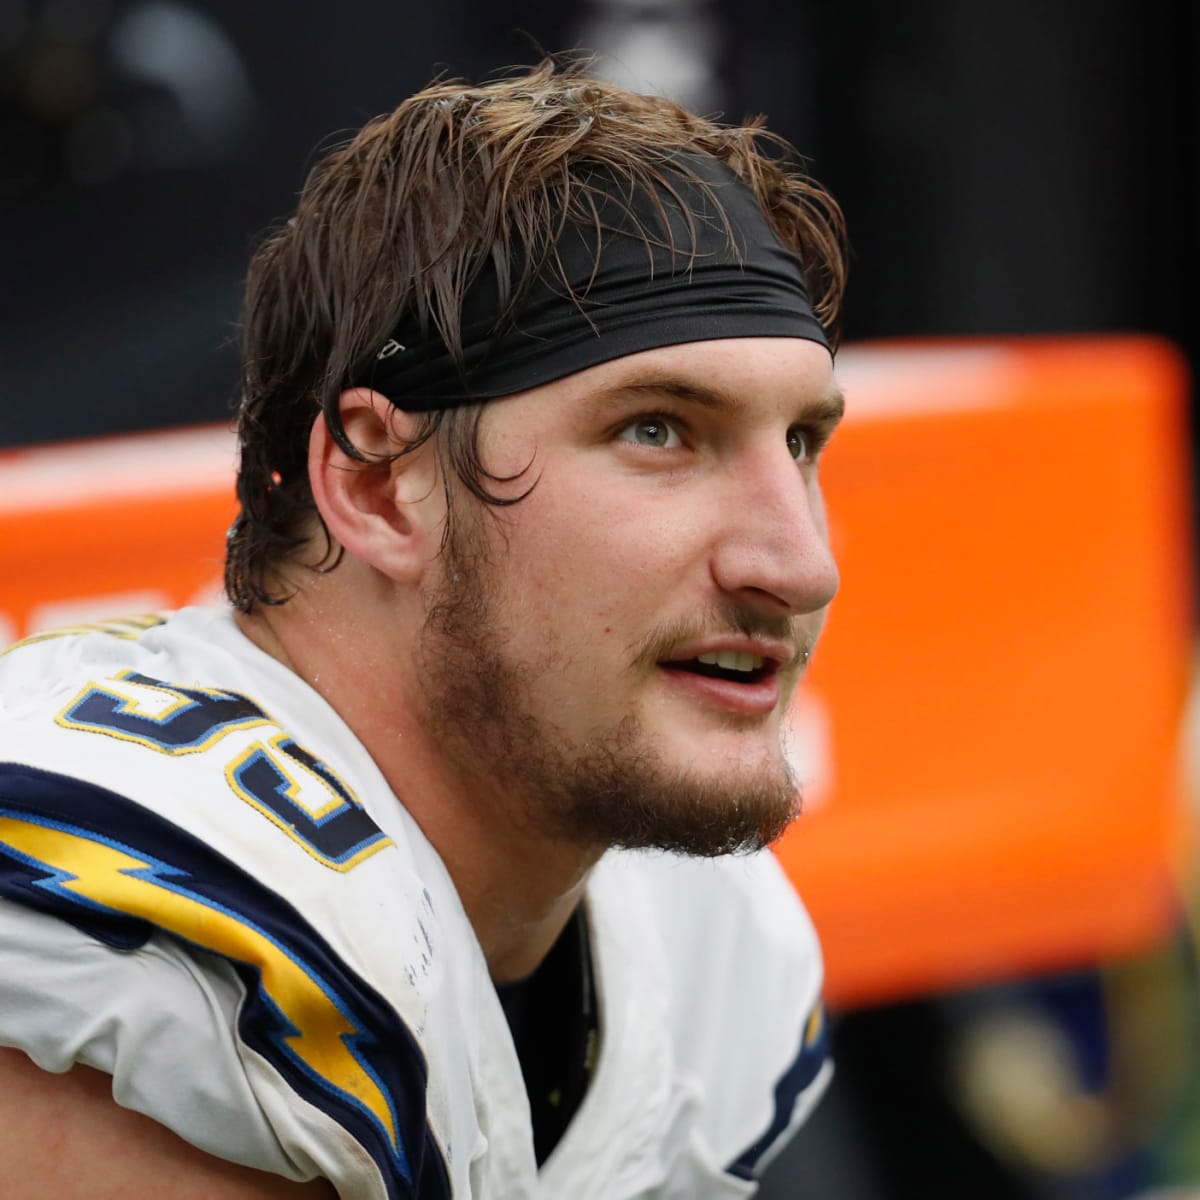 Video Shows Joey Bosa's Emotional Reaction To His Contract - The